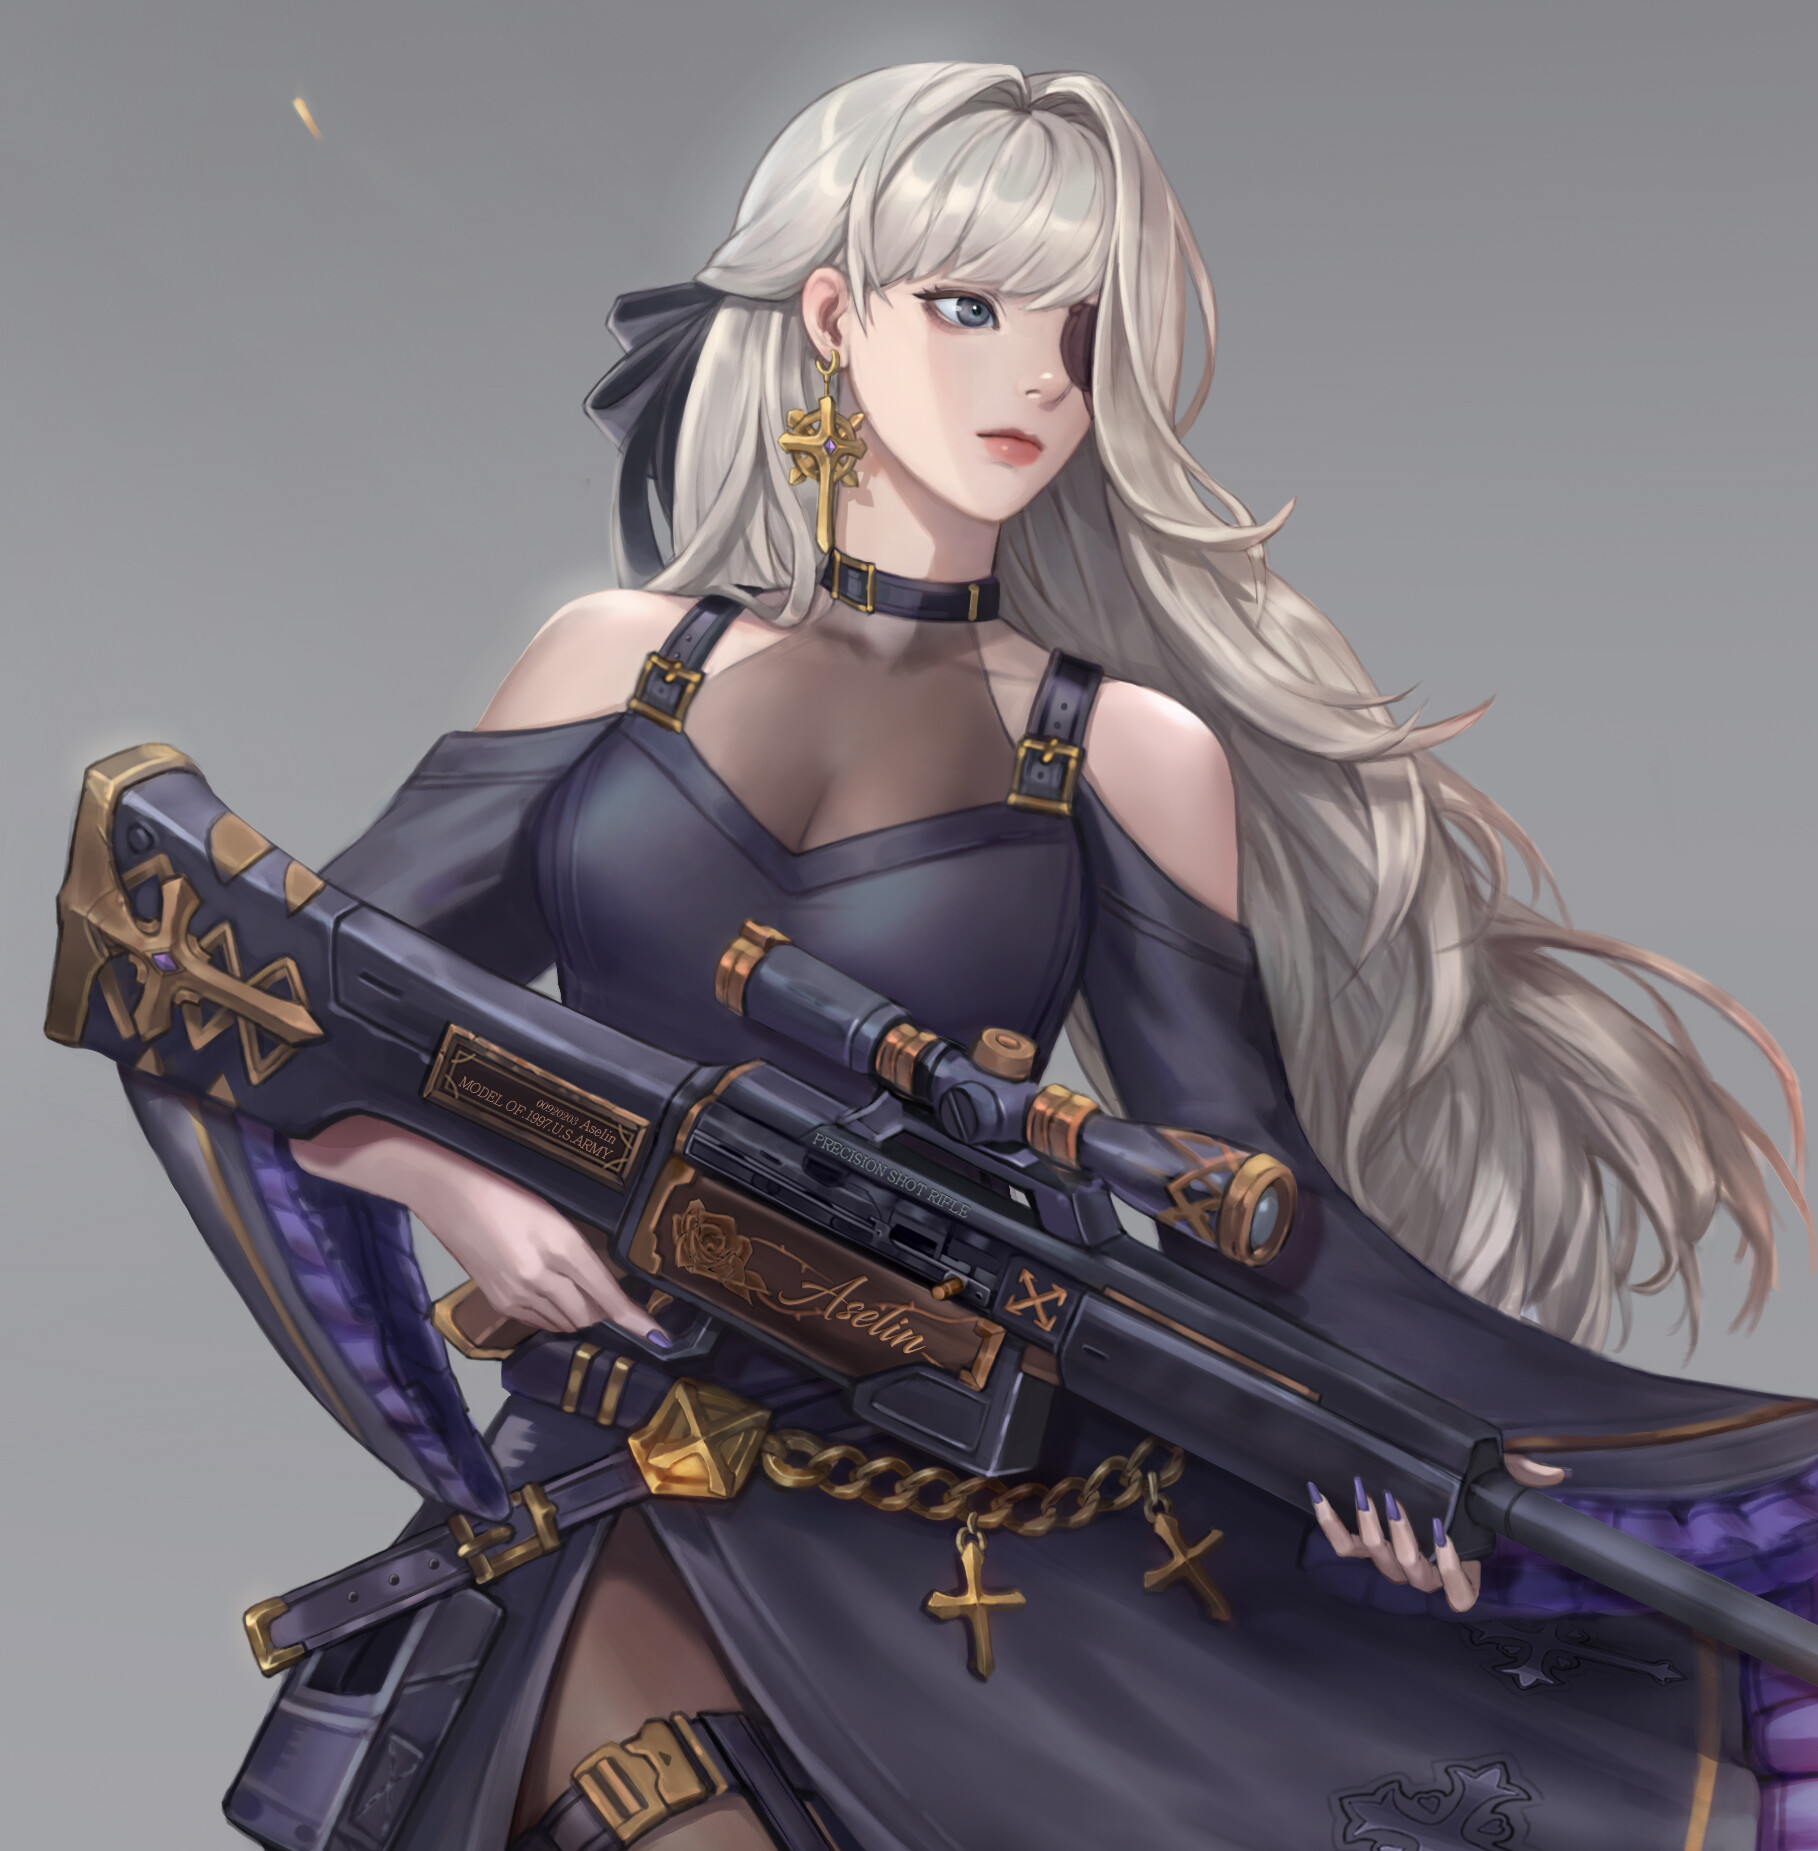 Anime 1818x1851 Discuzz ArtStation anime anime girls long hair weapon eyepatches rifles sniper rifle girls with guns simple background gray background painted nails purple nails looking away dress gray hair